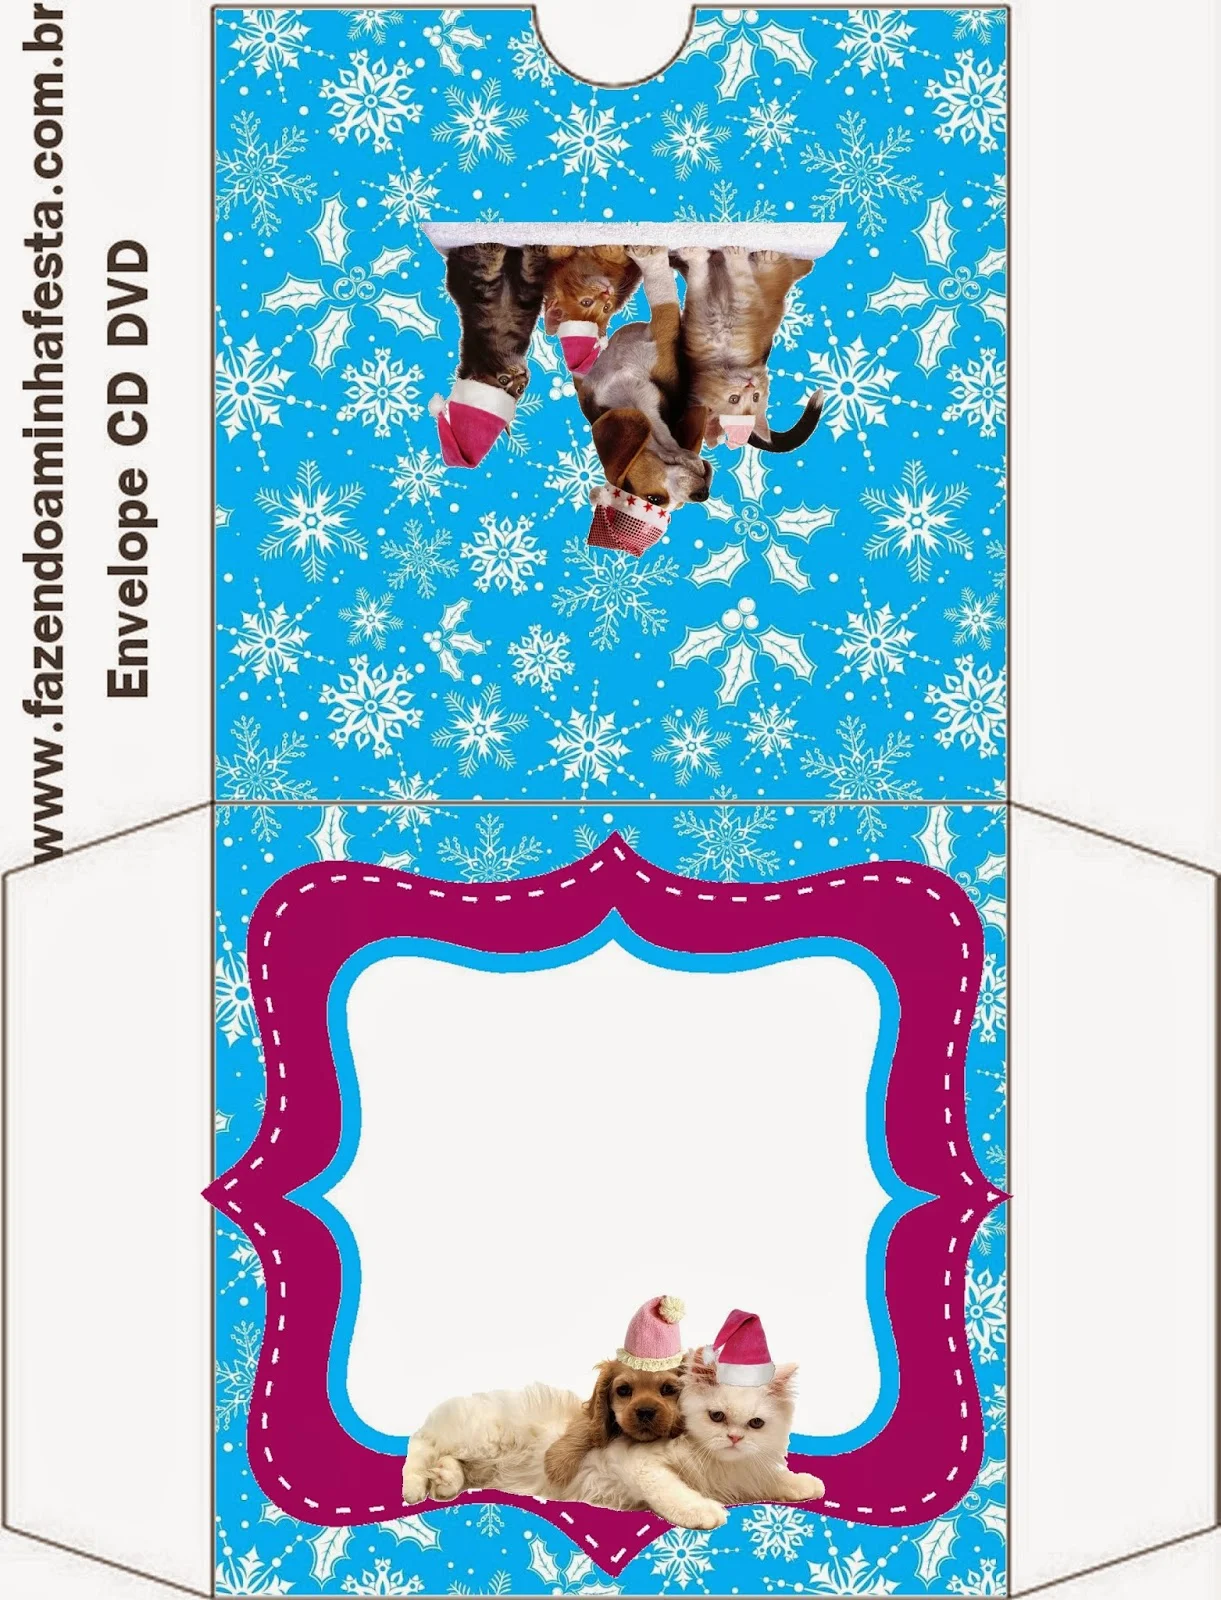 Dog and Cat in Christmas Free Printable CD case.